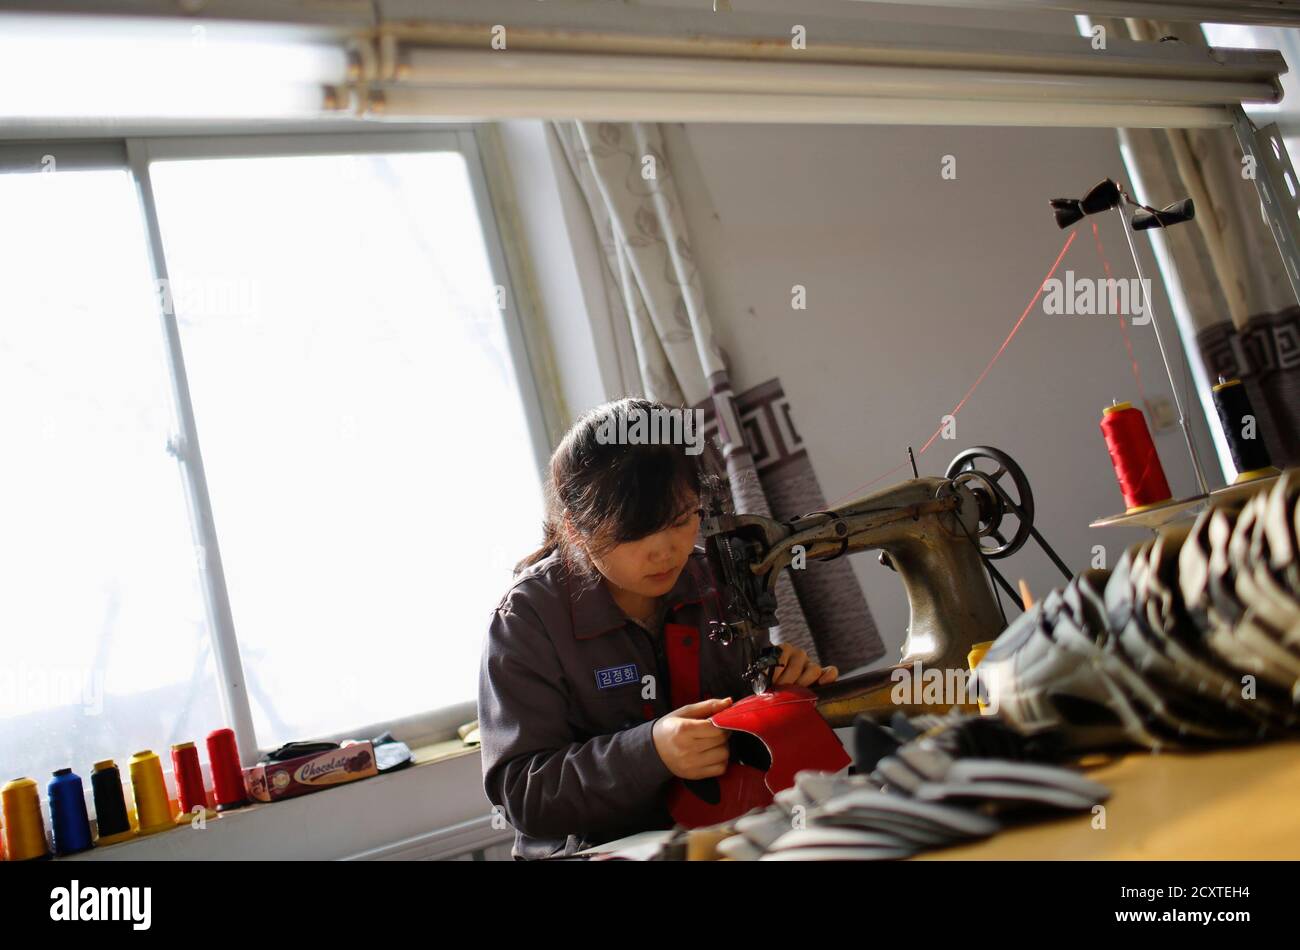 A North Korean worker sews inside a temporary soccer shoe factory at a  rural village on the edge of Dandong October 24, 2012. Top soccer-boot  maker Adidas probably shouldn't be worrying just